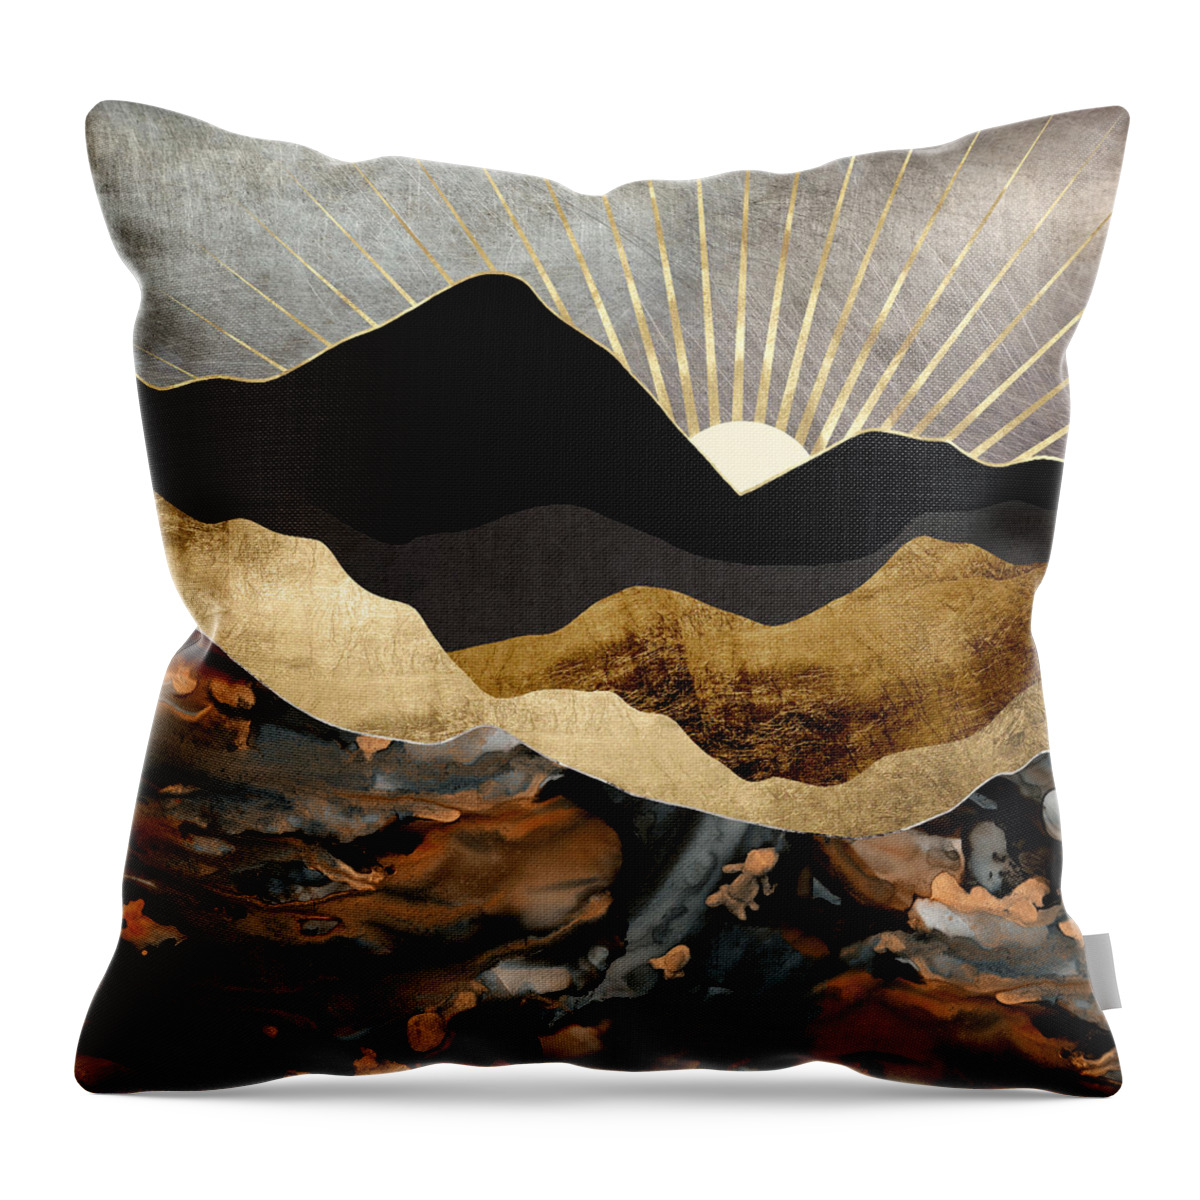 Digital Throw Pillow featuring the digital art Copper and Gold Mountains by Spacefrog Designs